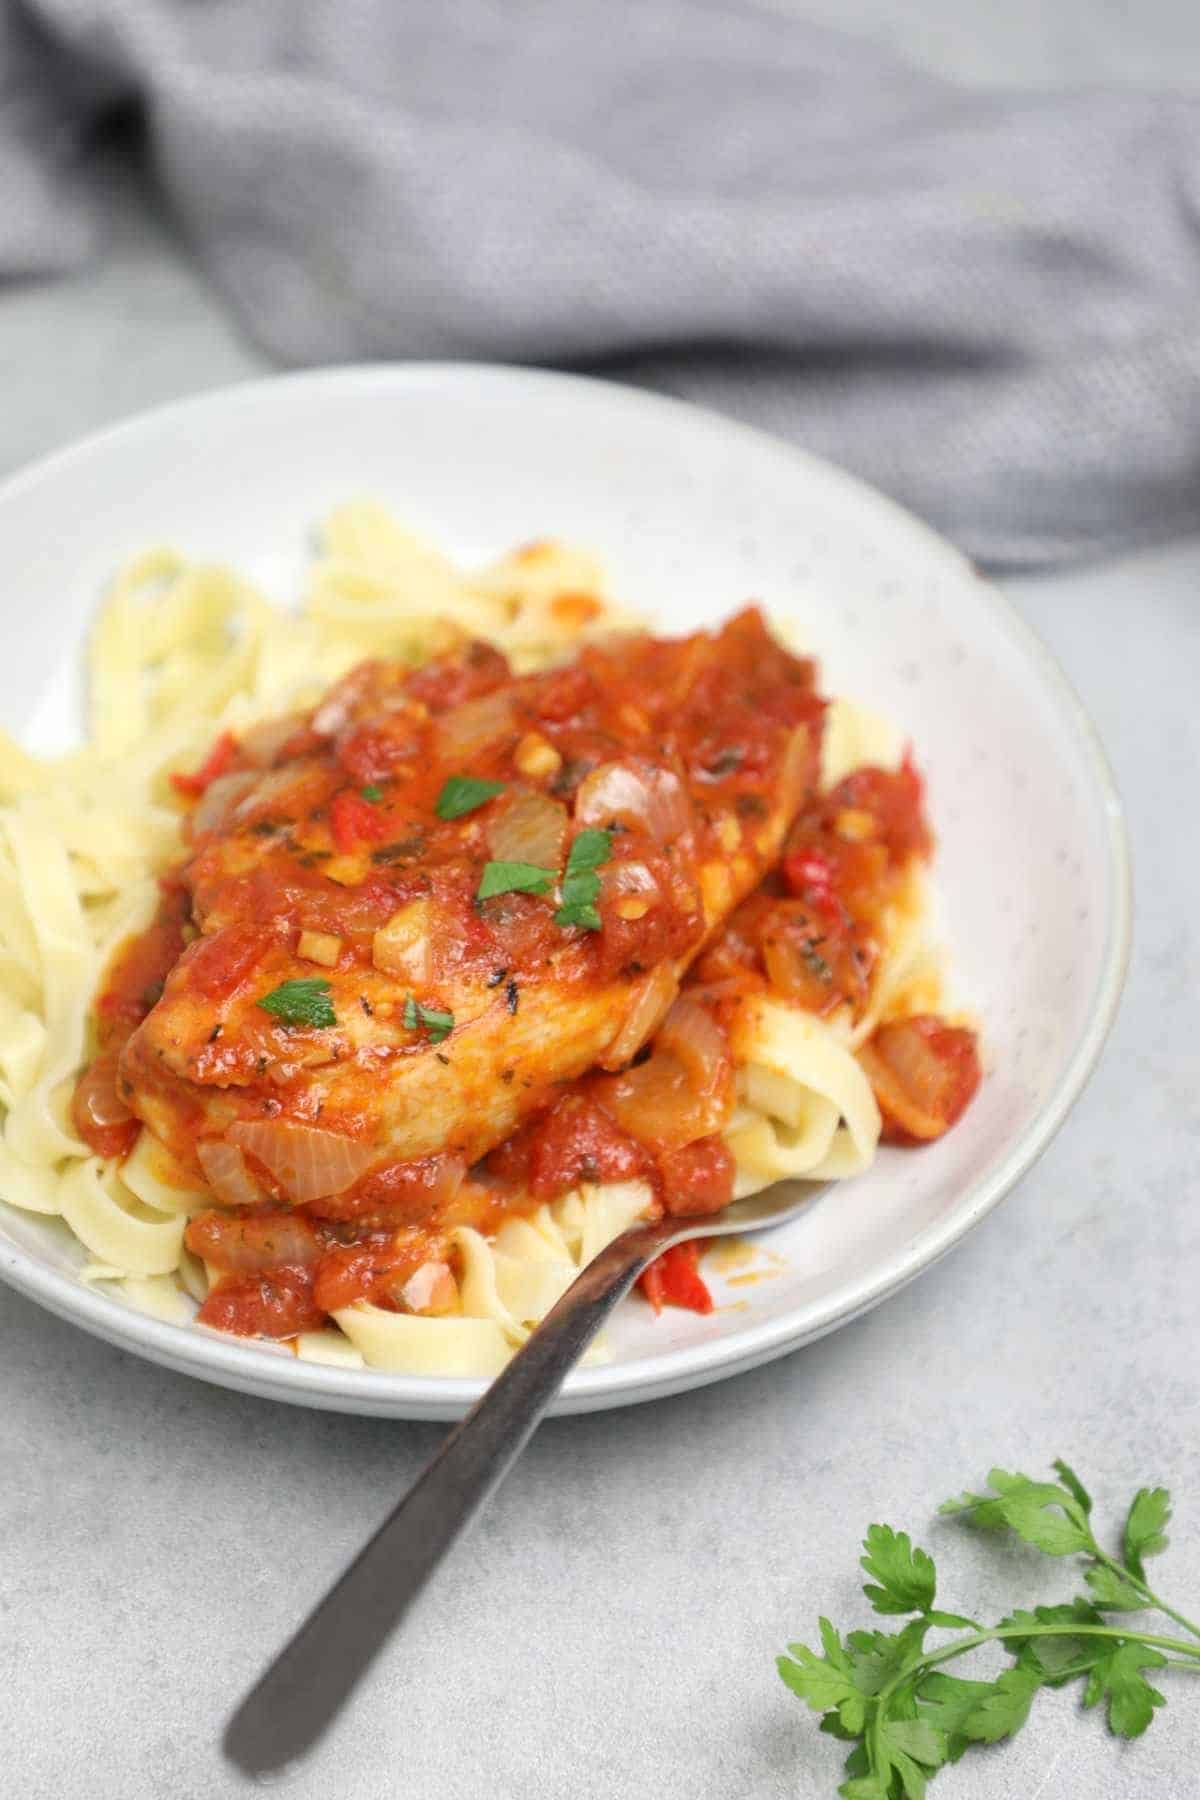 chicken in tomato sauce served on pasta and garnished with parsley.